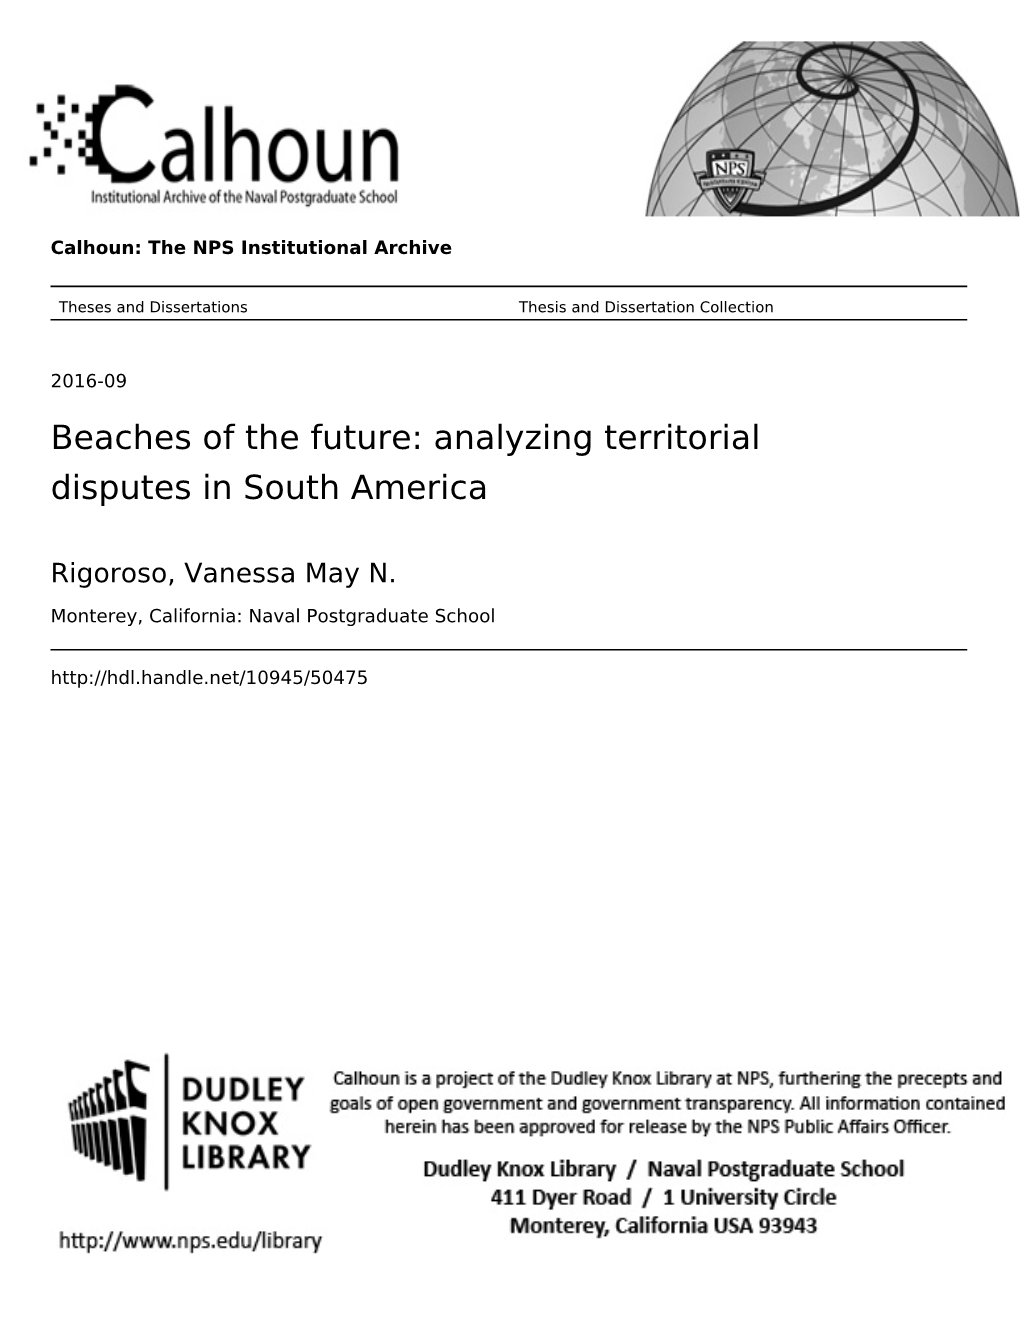 Analyzing Territorial Disputes in South America